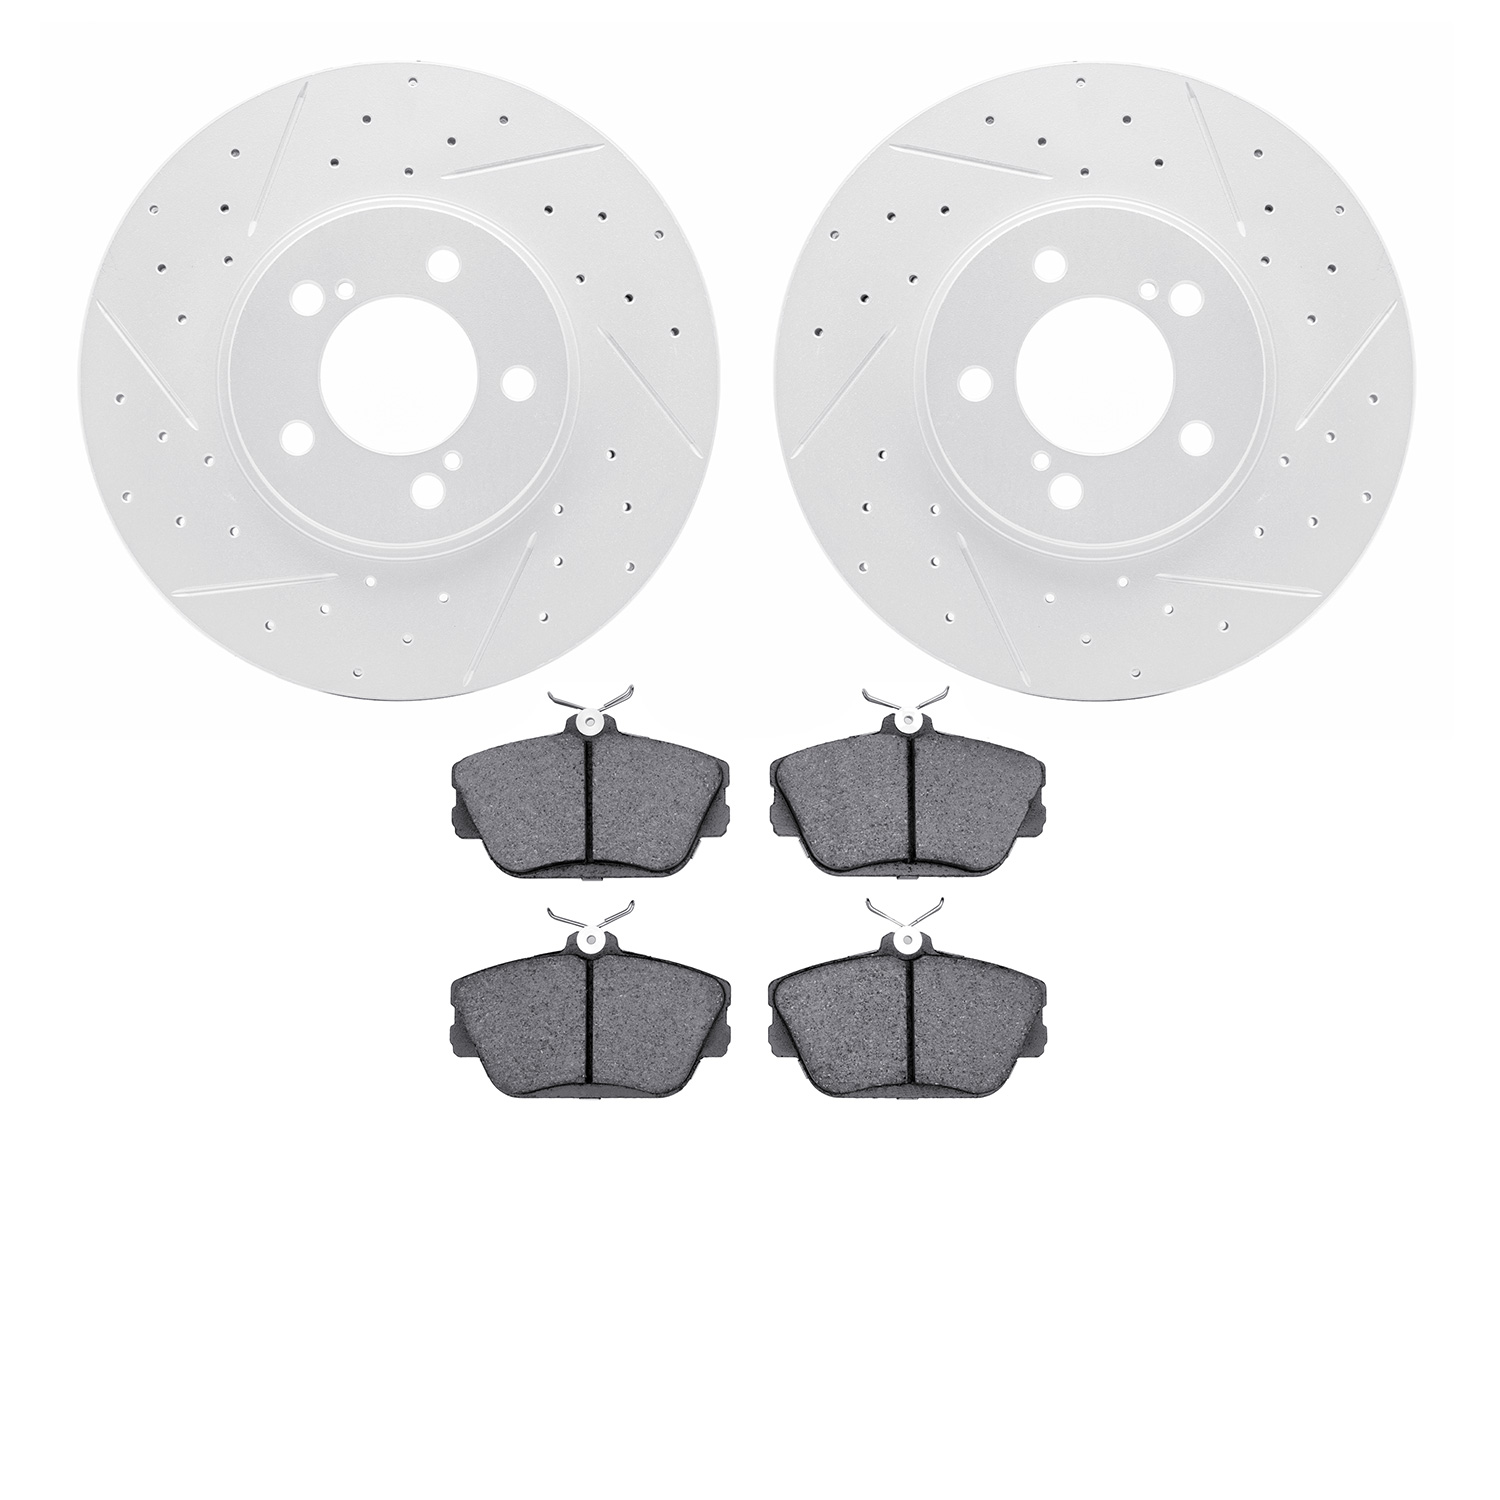 2502-54016 Geoperformance Drilled/Slotted Rotors w/5000 Advanced Brake Pads Kit, 1996-2007 Ford/Lincoln/Mercury/Mazda, Position: